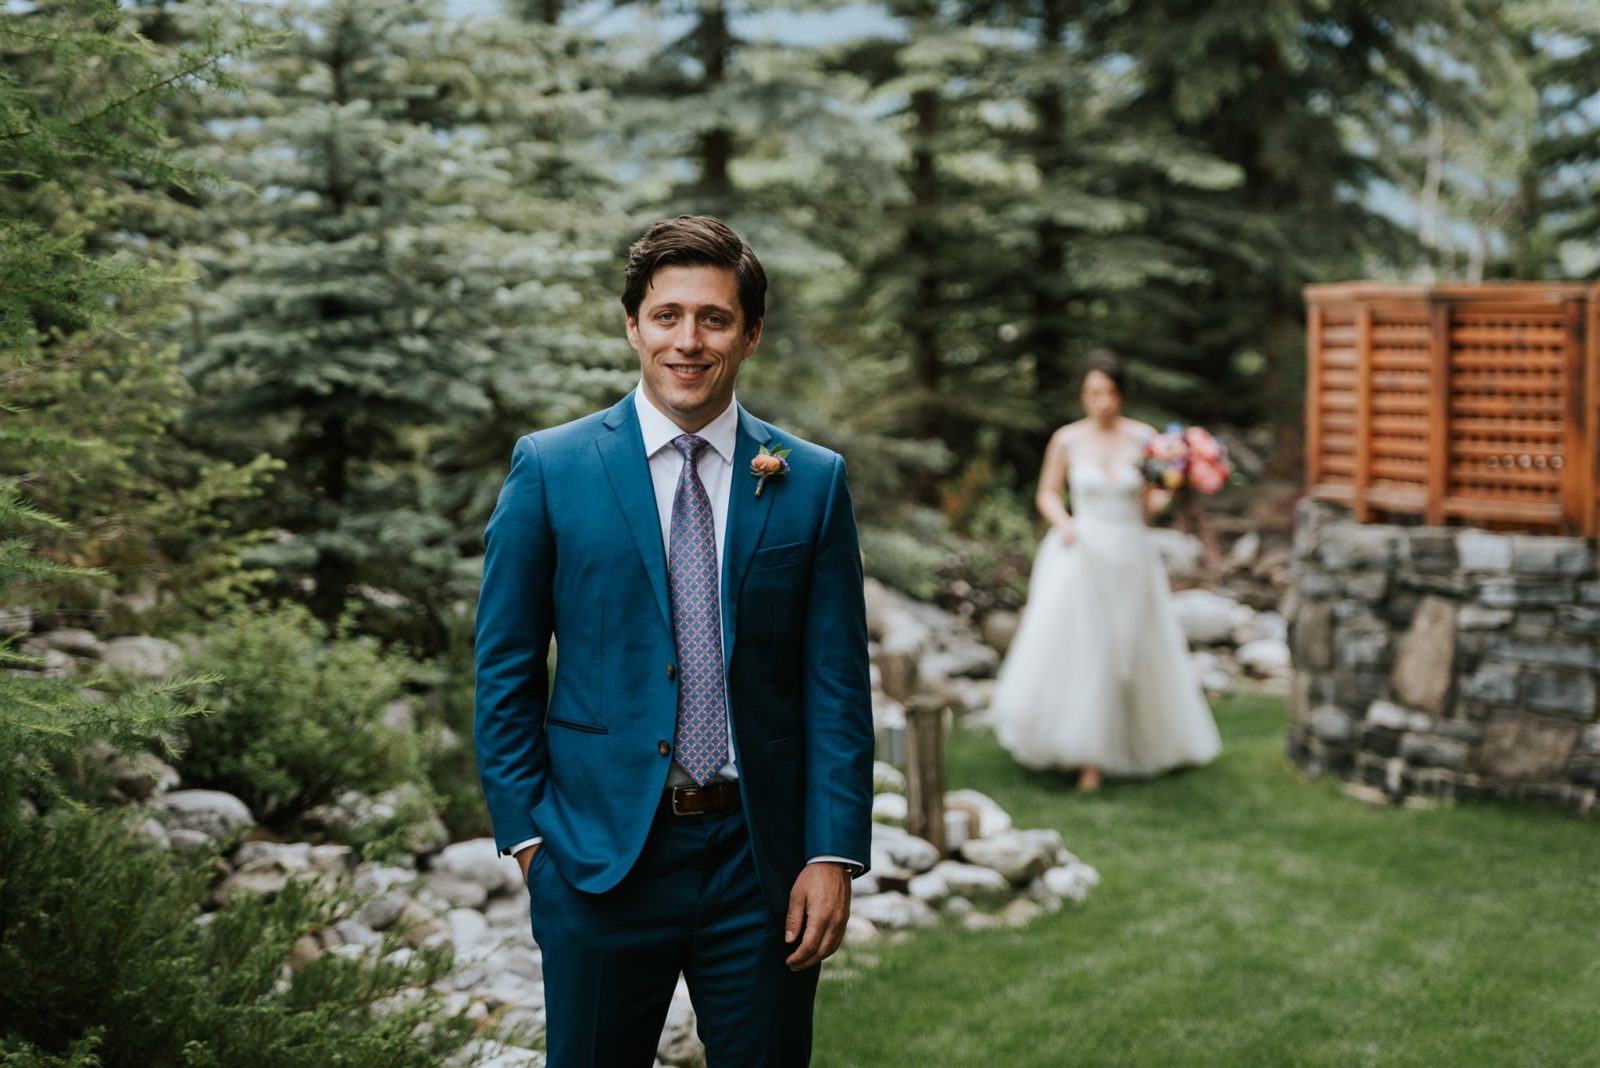 Intimate Mountaintop Wedding in Canmore With Colourful Wildflowers - featured on the Bronte Bride Blog